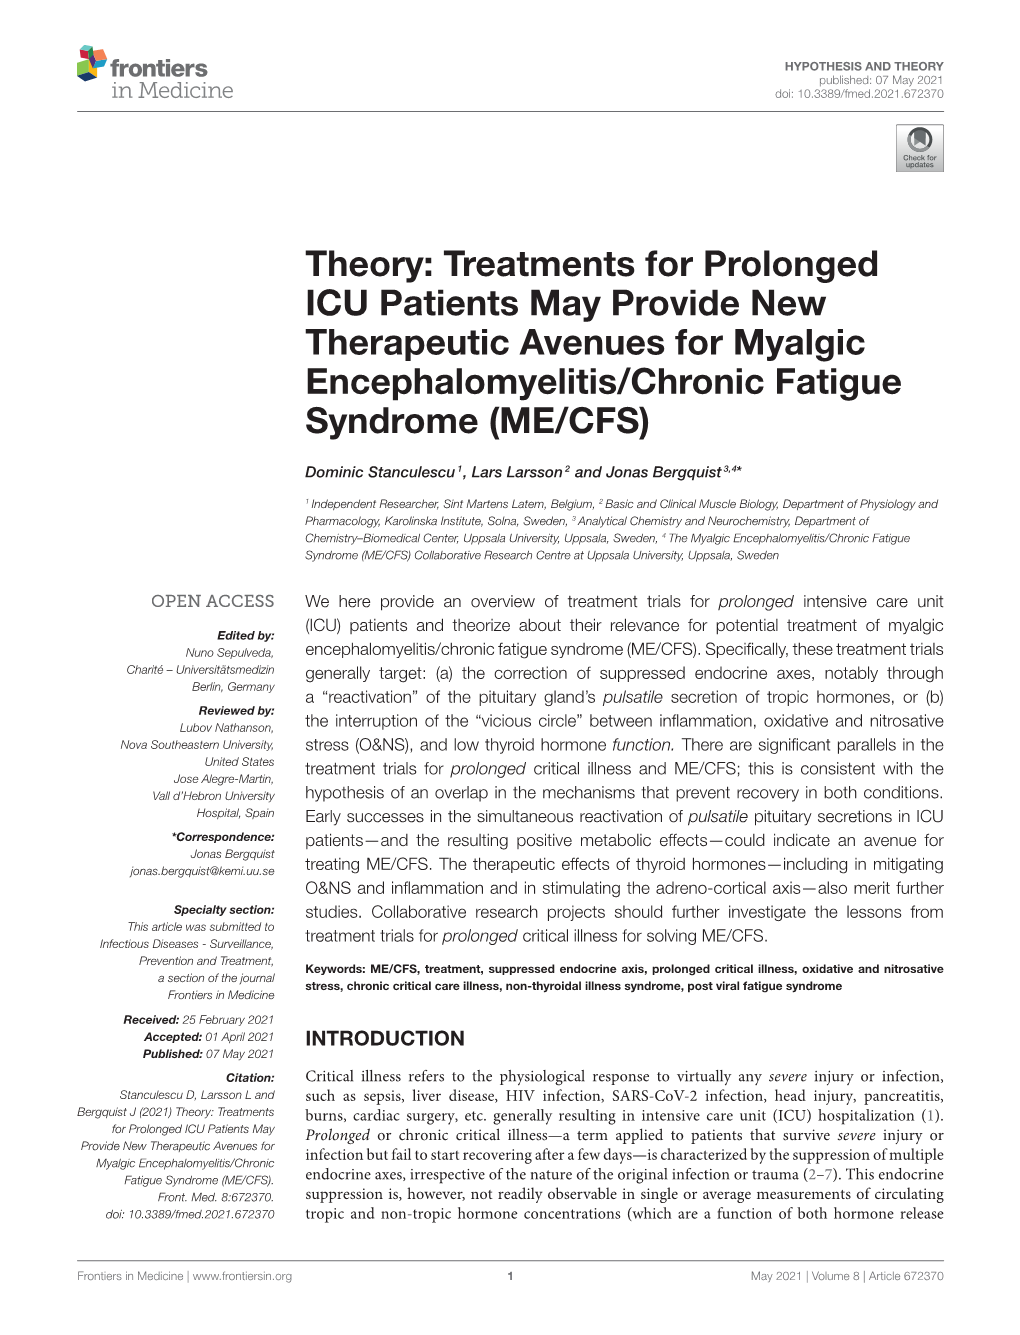 Theory: Treatments for Prolonged ICU Patients May Provide New Therapeutic Avenues for Myalgic Encephalomyelitis/Chronic Fatigue Syndrome (ME/CFS)